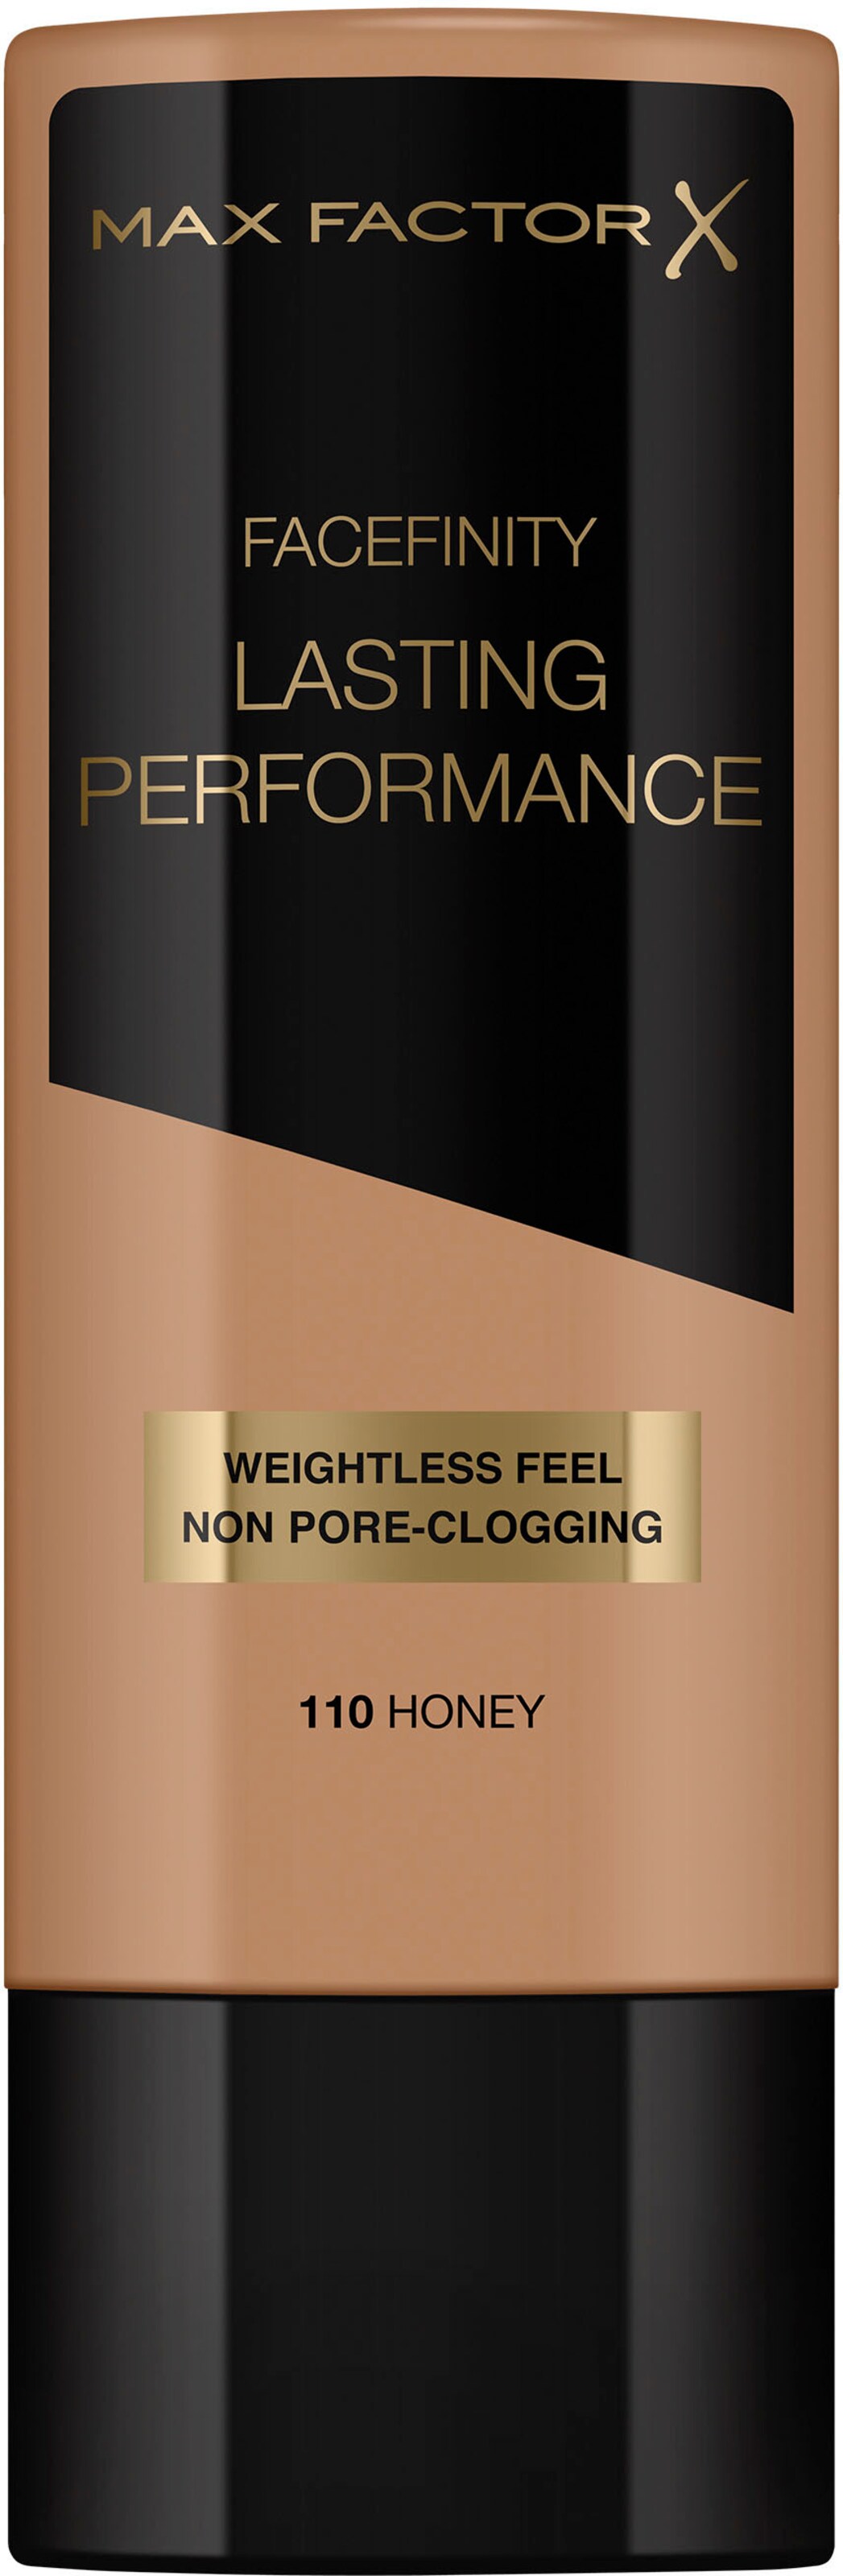 MAX FACTOR Foundation Facefinity Lasting Performance in Beige 